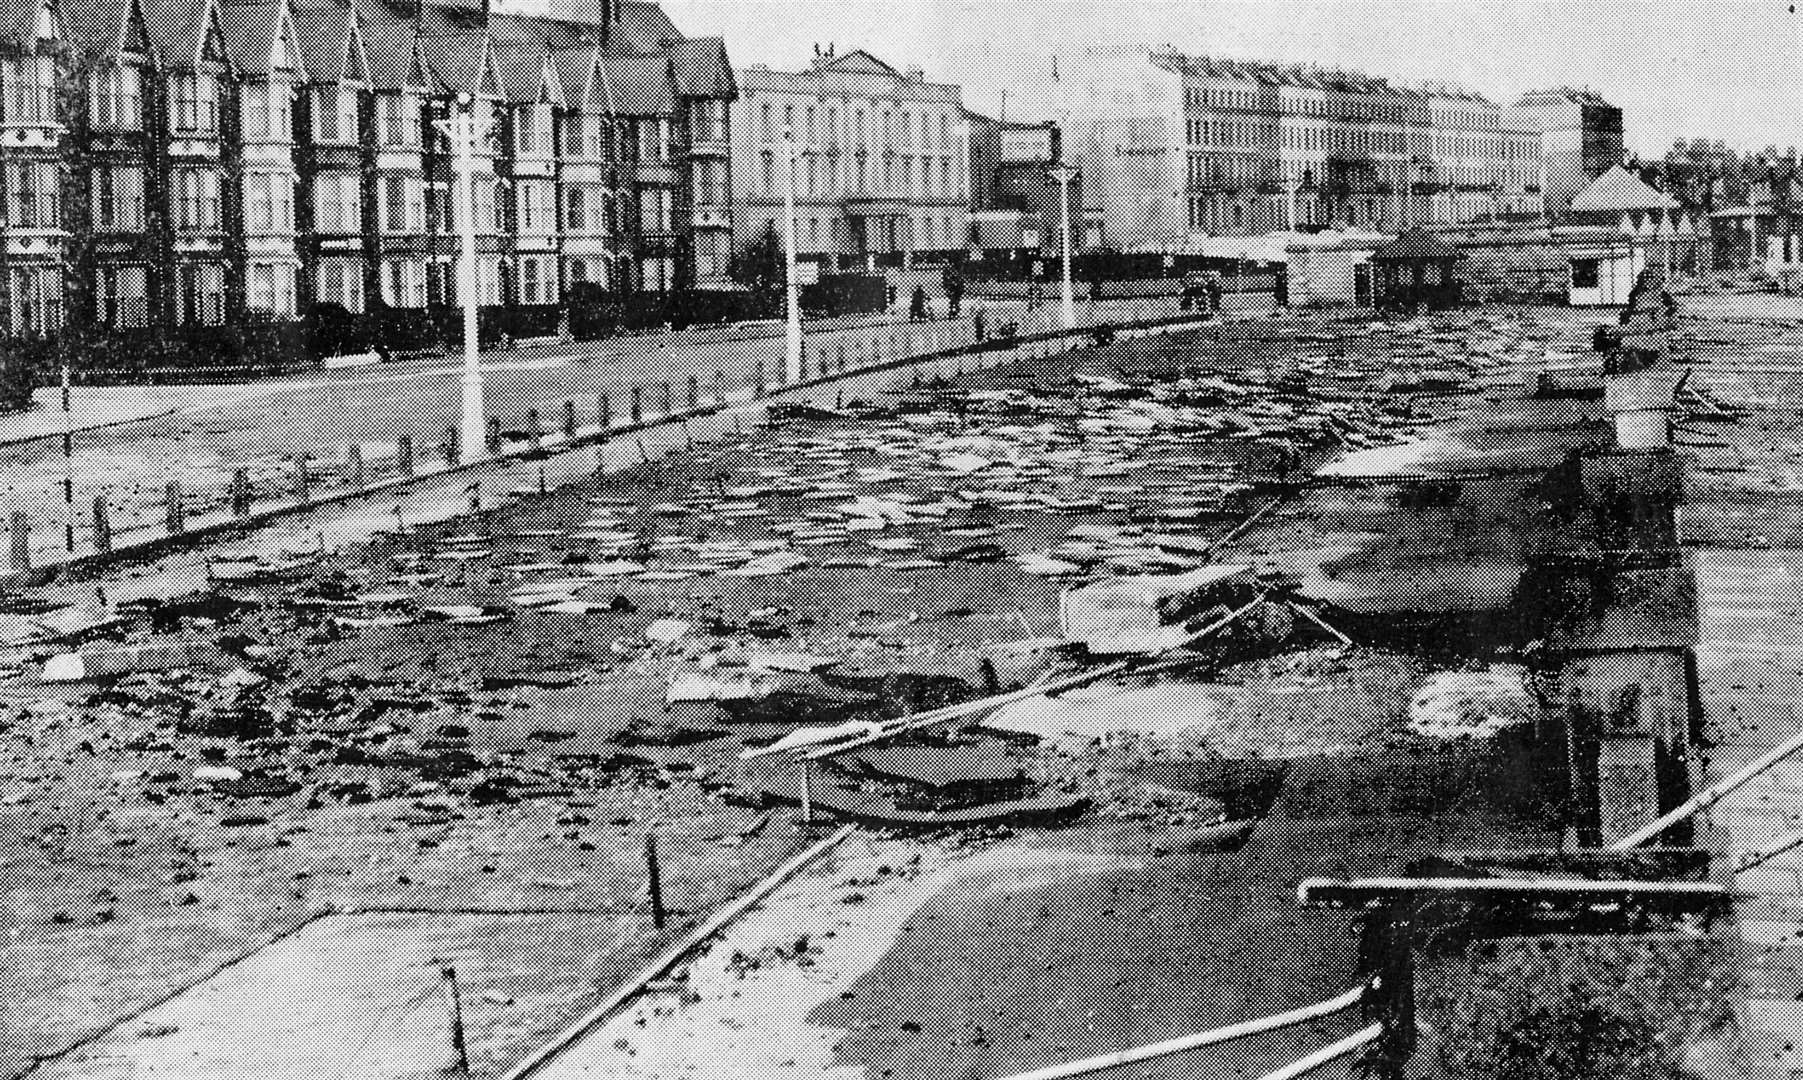 Herne Bay was last hit by major flooding in 1953